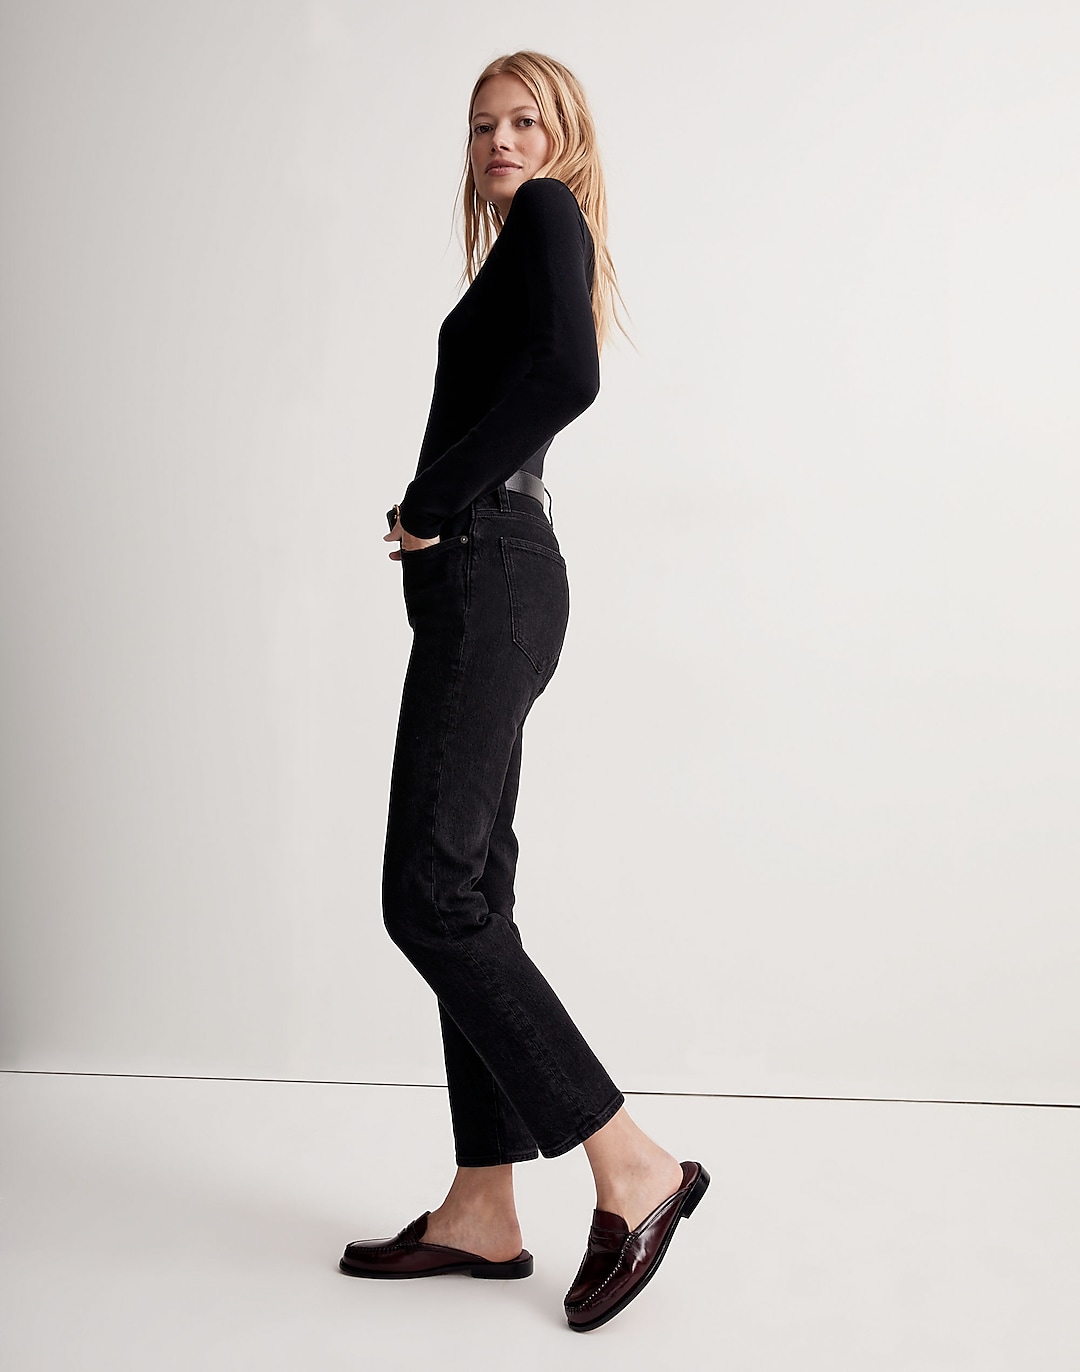 The Mid-Rise Perfect Vintage Jeans in Clean Black Wash